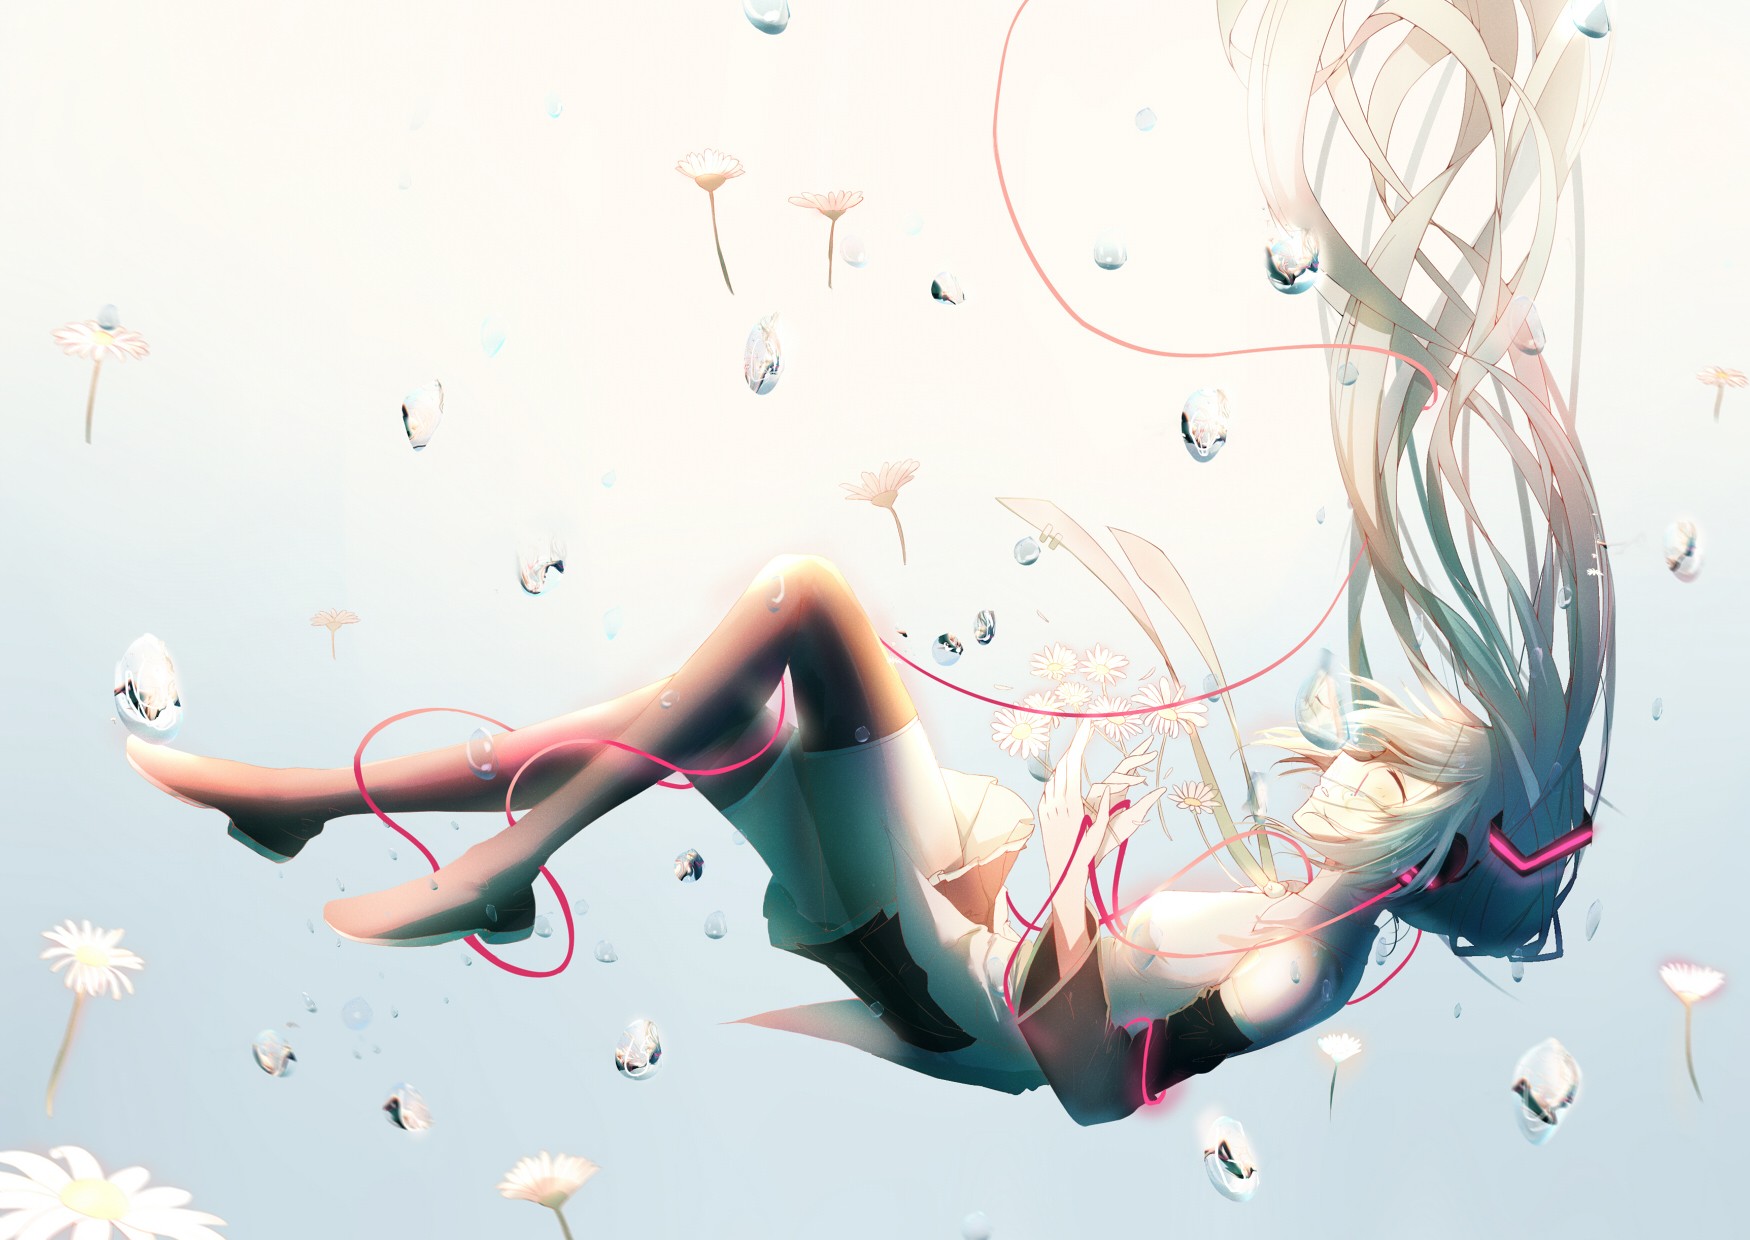 Anime 1750x1240 Vocaloid Hatsune Miku long hair twintails headphones necktie skirt boots underwater bubbles flowers wires anime girls anime falling plants legs closed eyes